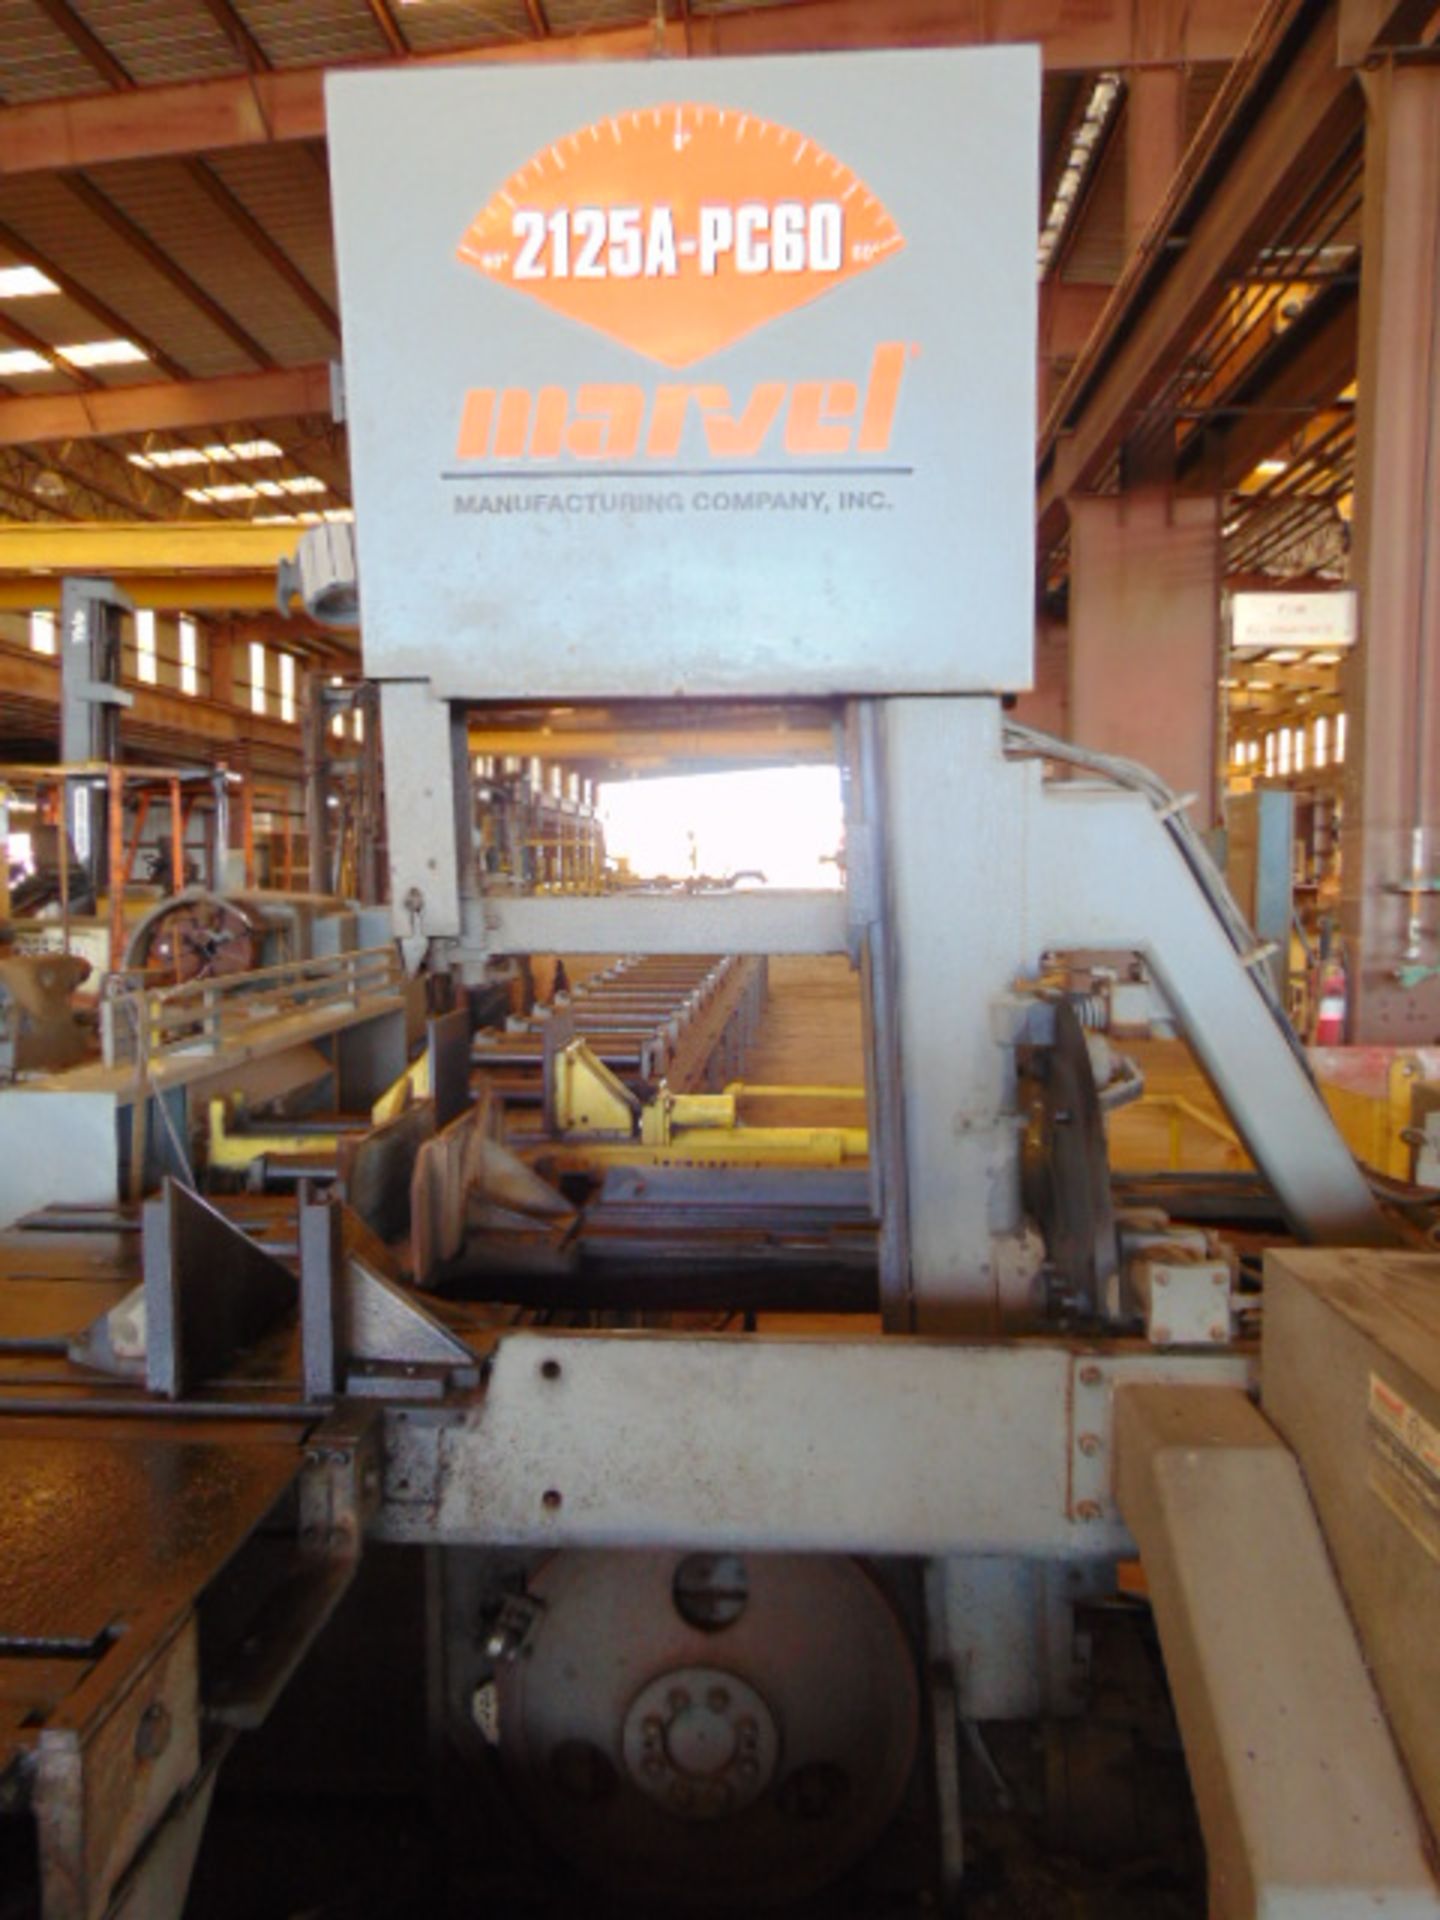 VERTICAL BANDSAW, MARVEL MDL. 2125A-PC60 TILT FRAME, 30' infeed/outfeed H.D. roller conveyors, - Image 6 of 13